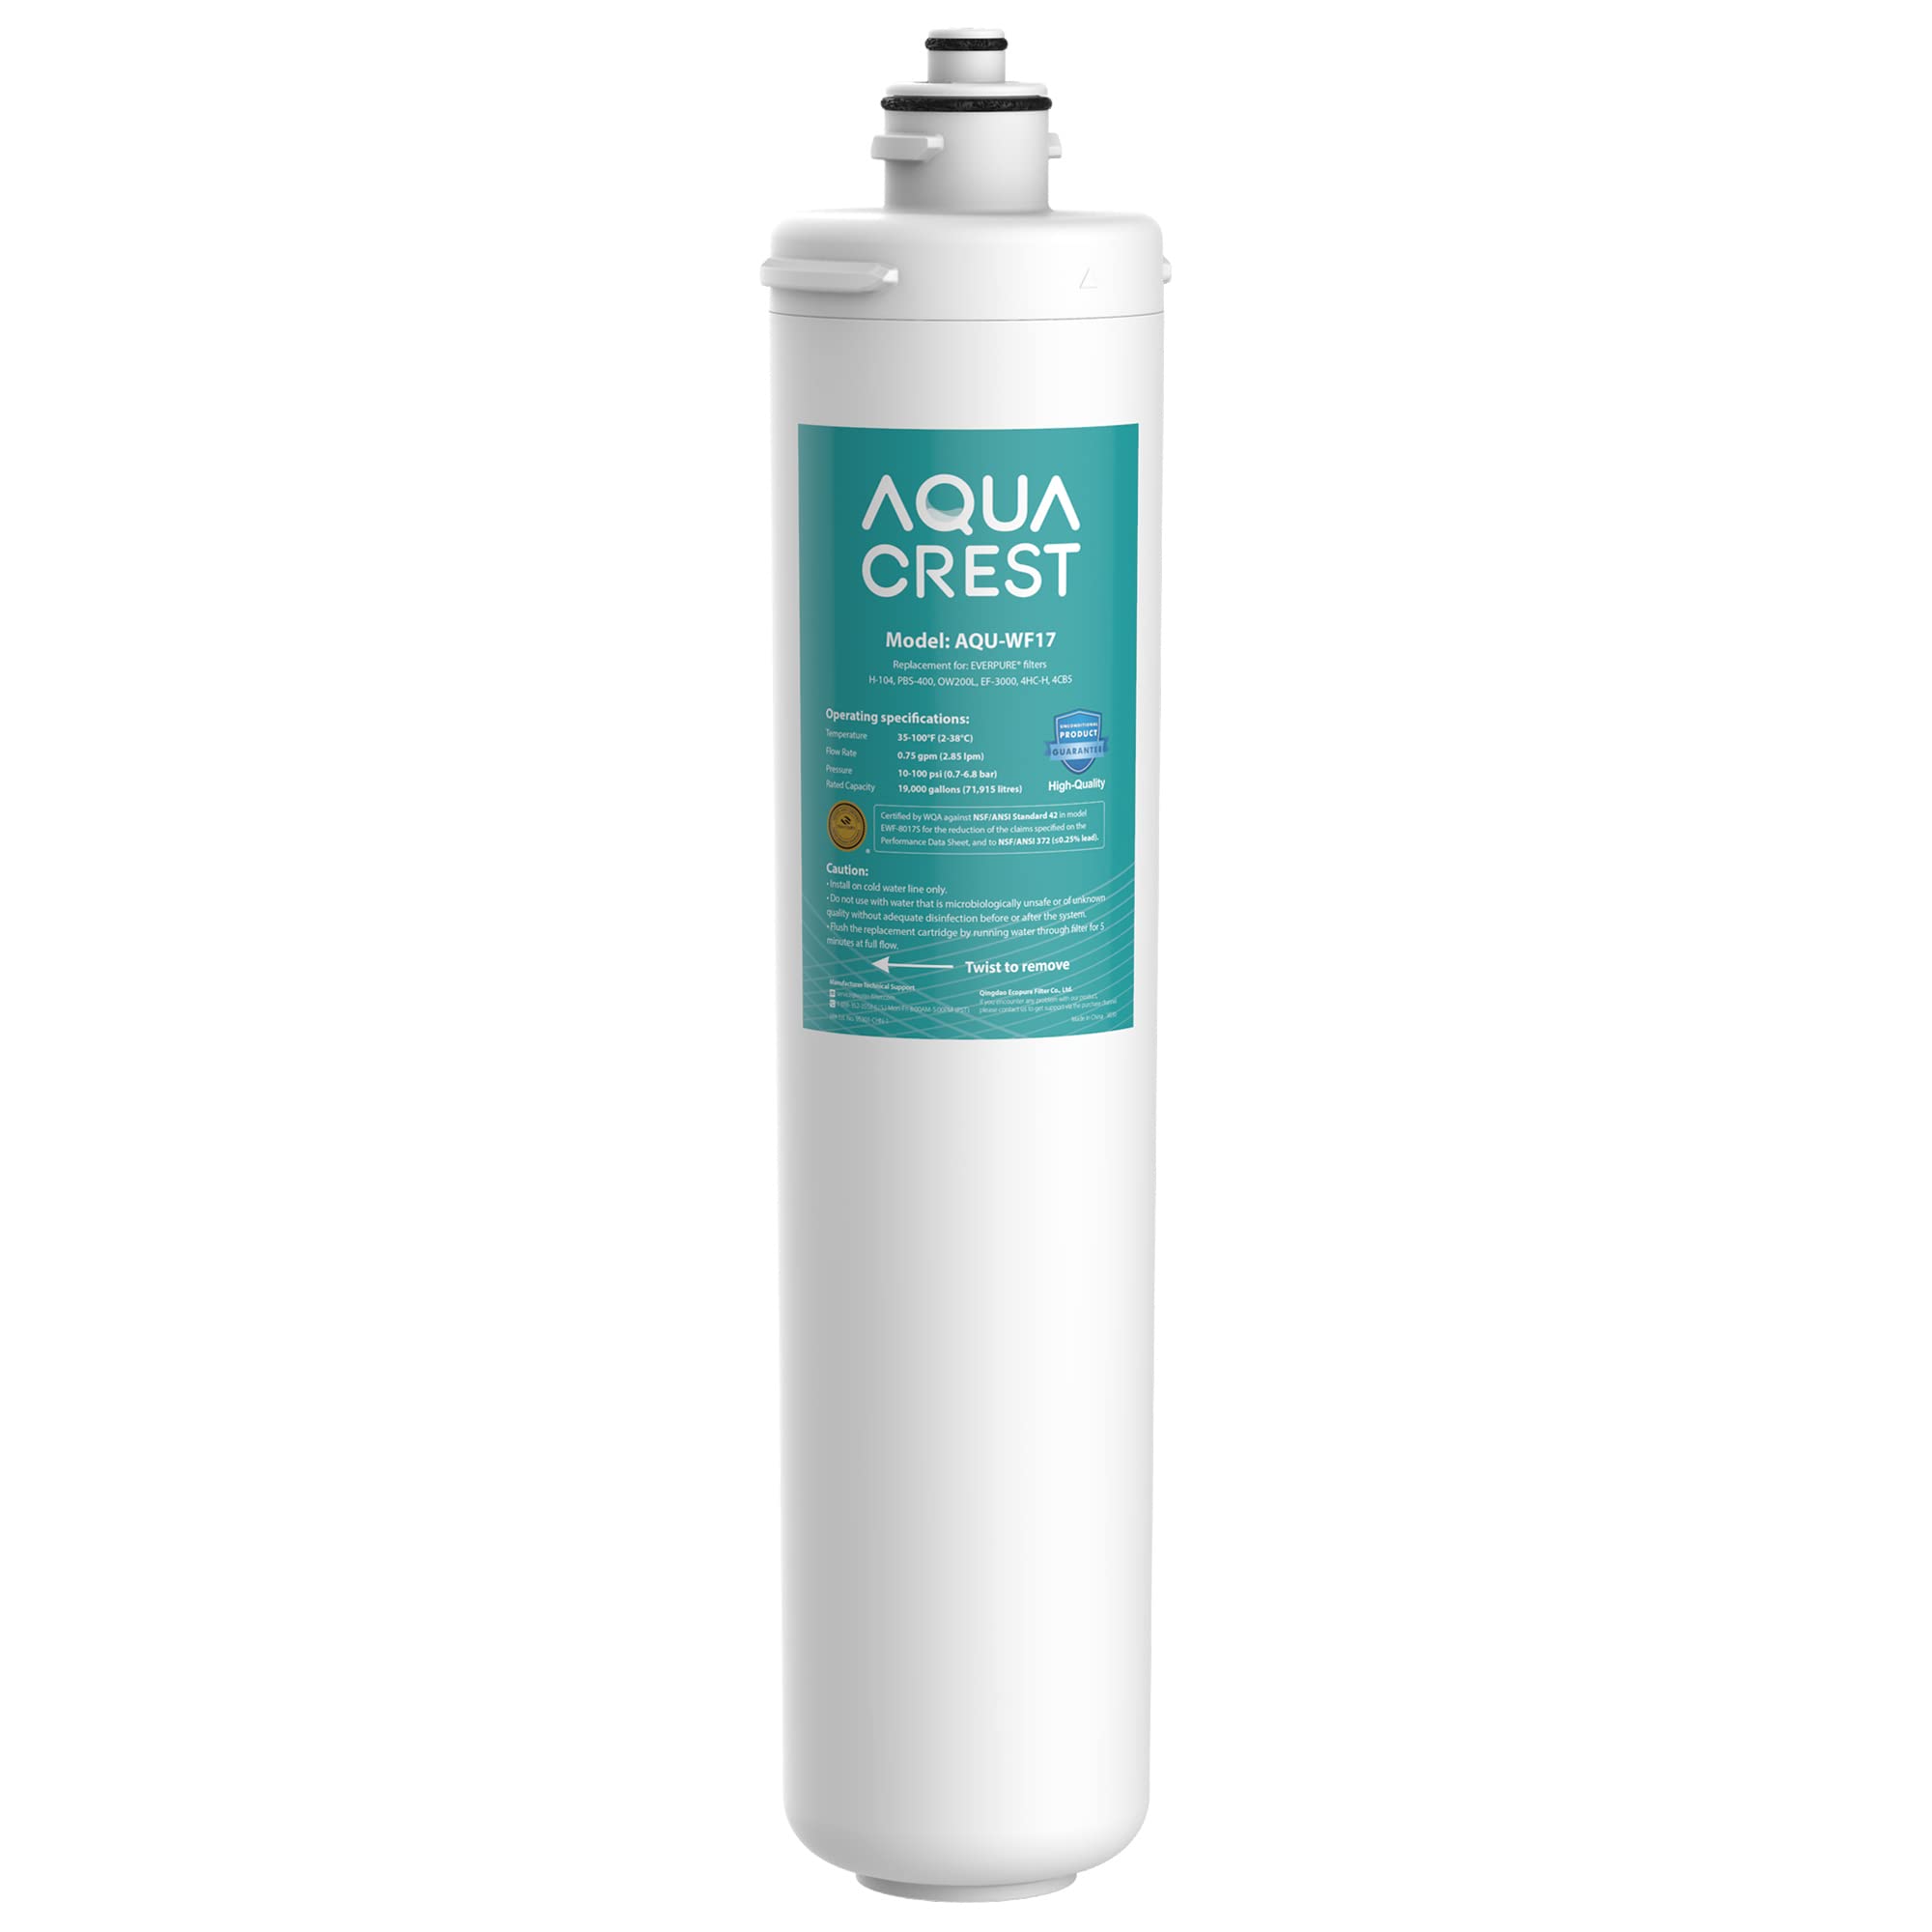 AQUA CREST H-104 19000 Gallons, Replacement Cartridge for Everpure H-104, EV961211, EF-3000, PBS-400, OW200L, 6TO-BW, MR-100, MR-225, EV9262-71, EF9857-00, 0.5 Micron